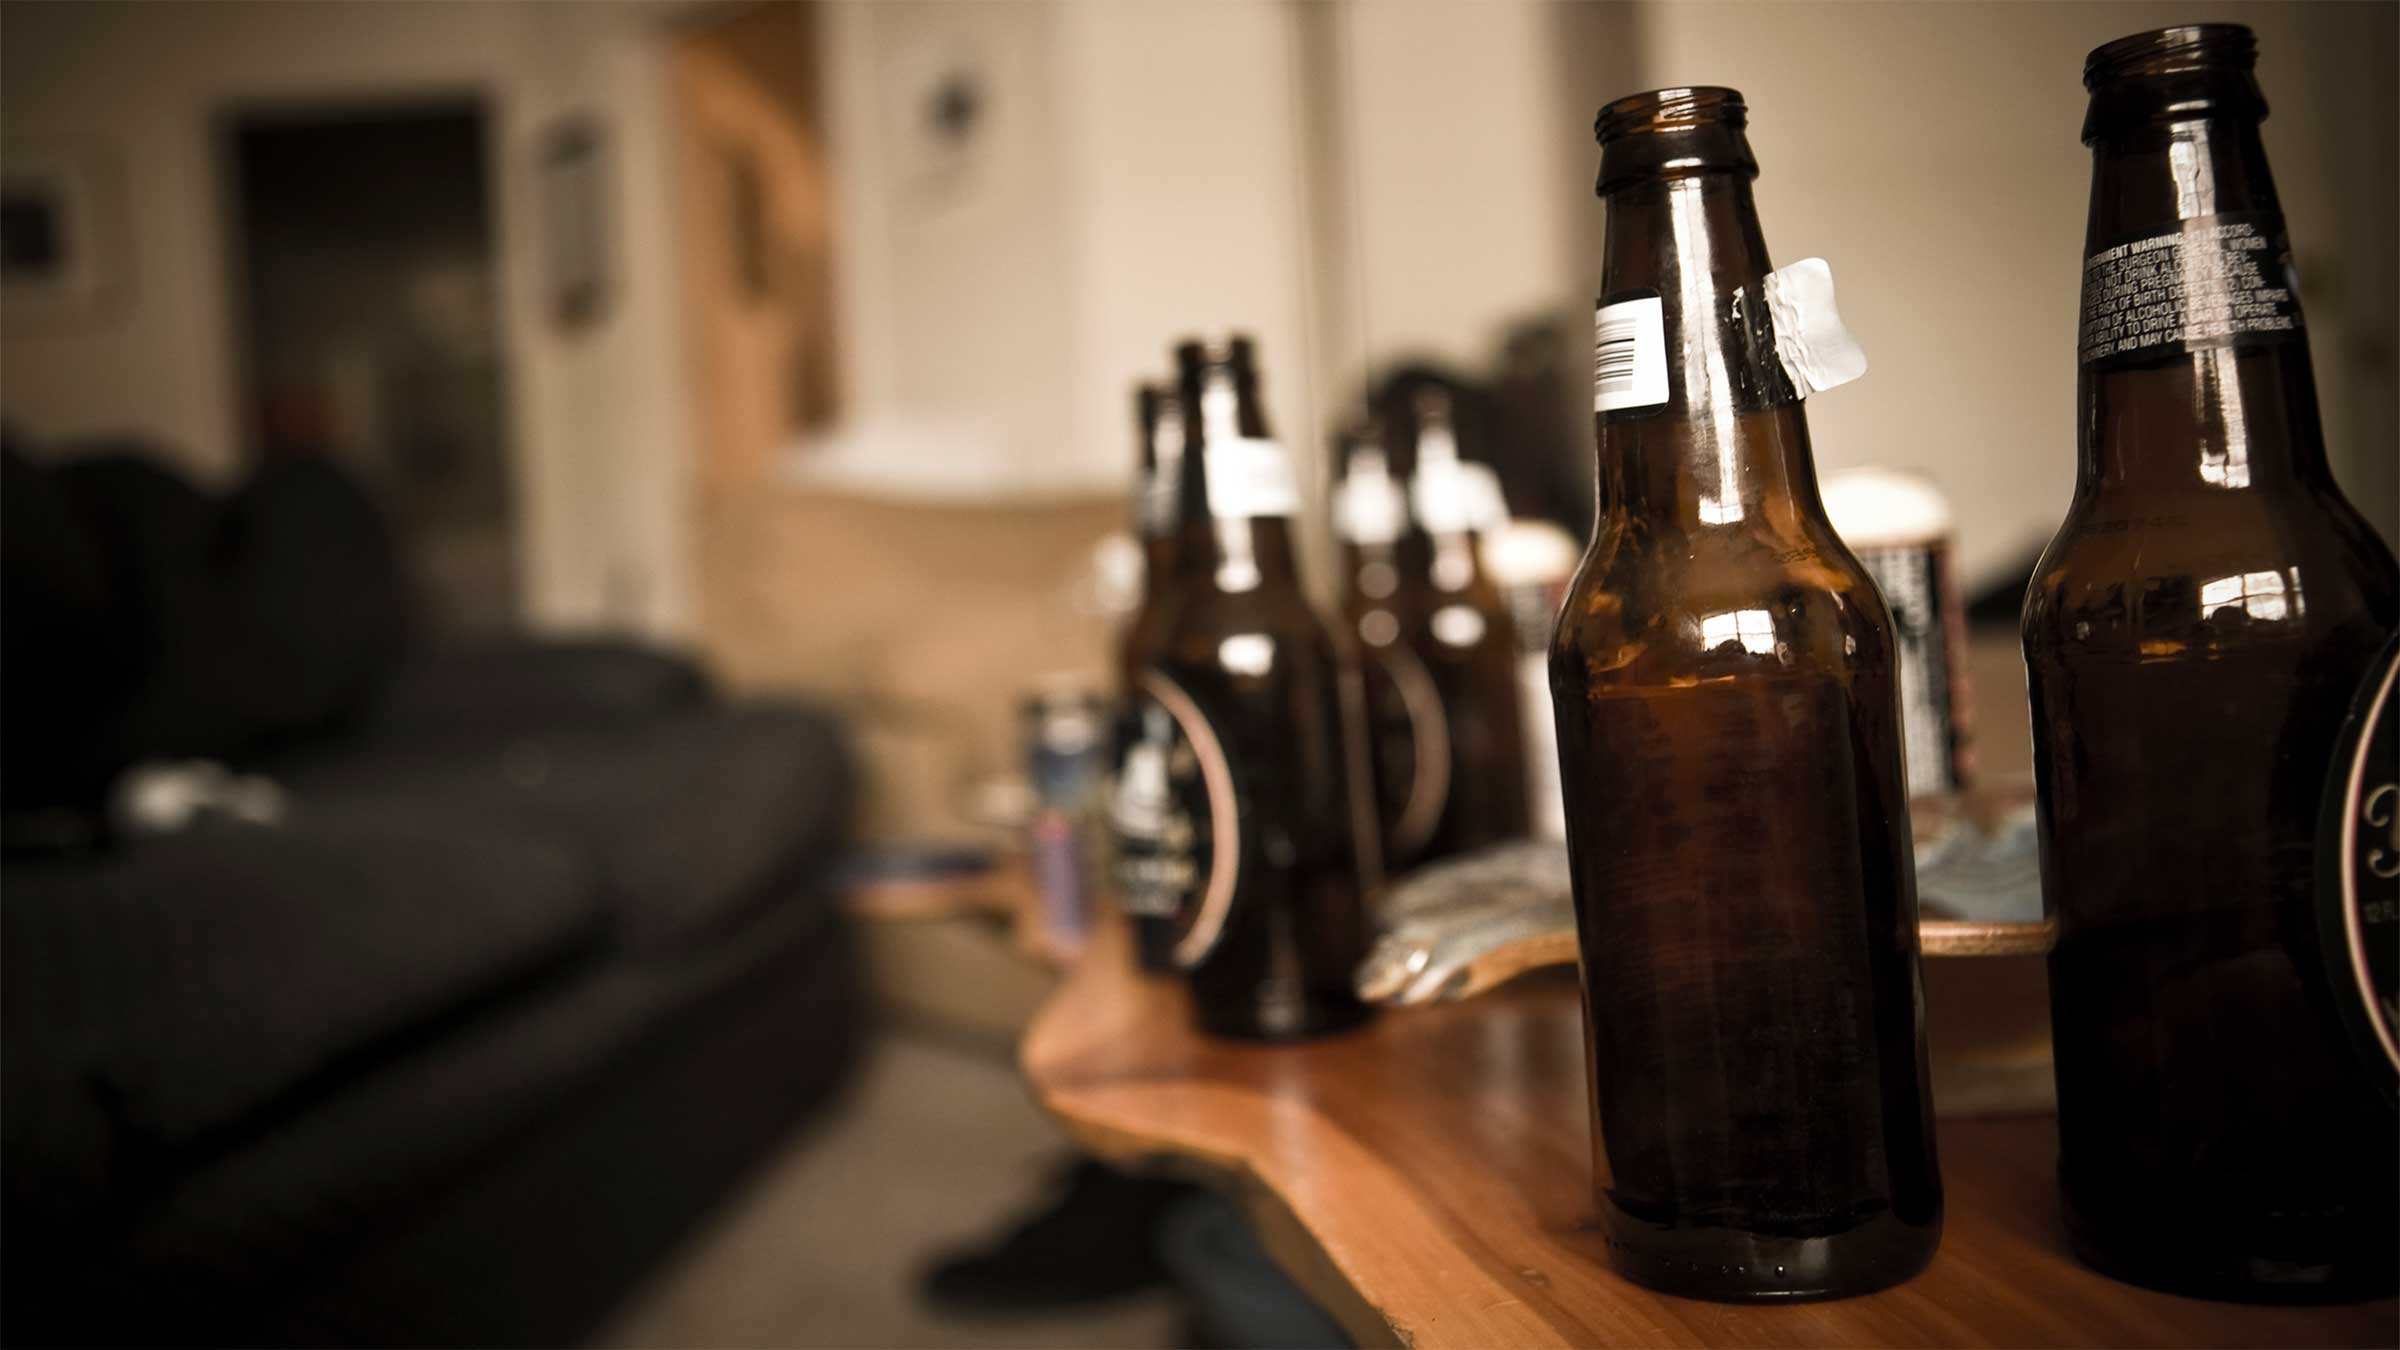 Empty beer bottles on table.